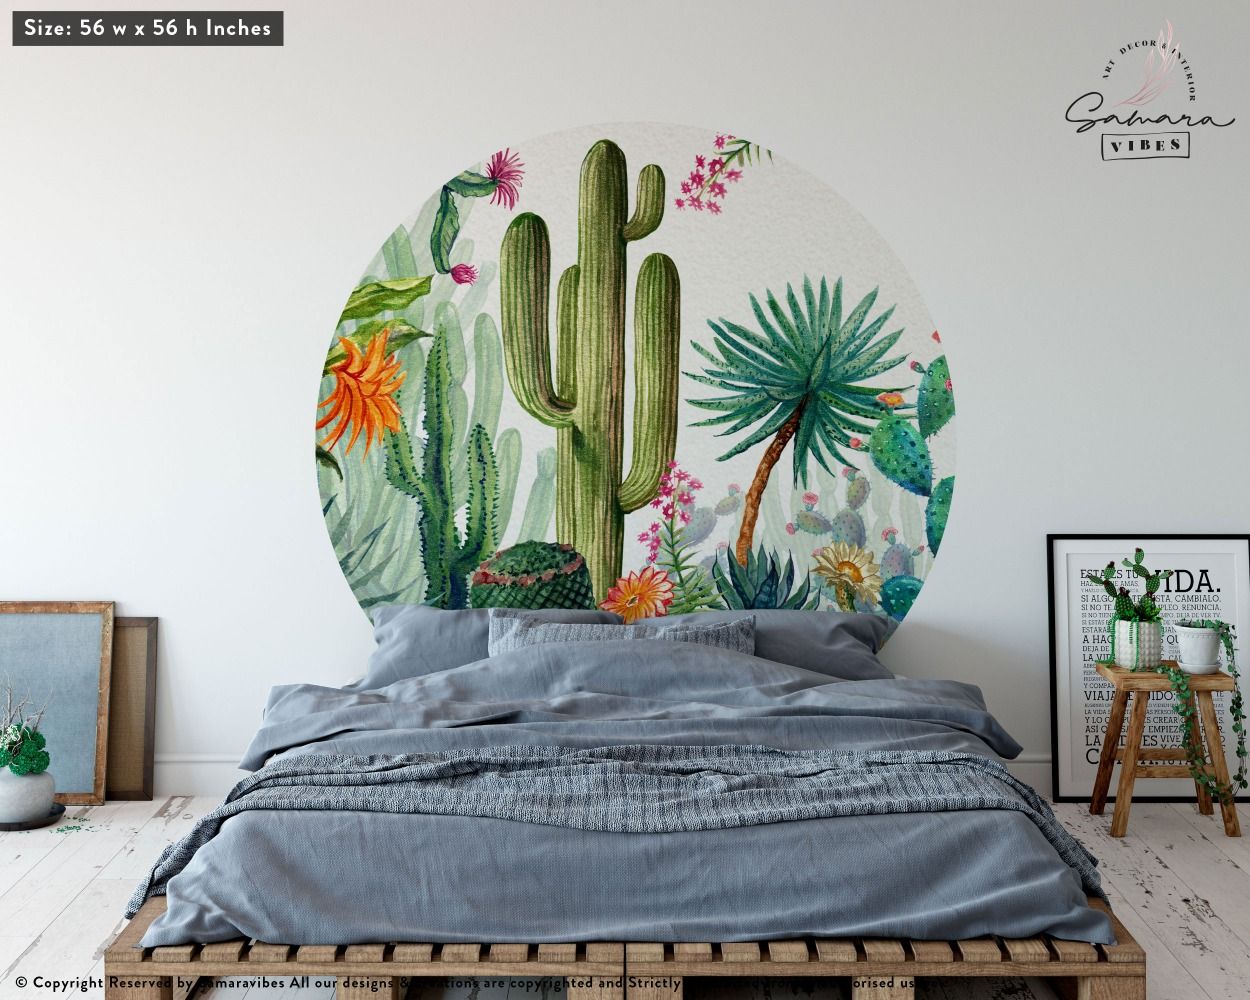 Cactus & Succulents Wall Stickers for Bedroom Wall Decor